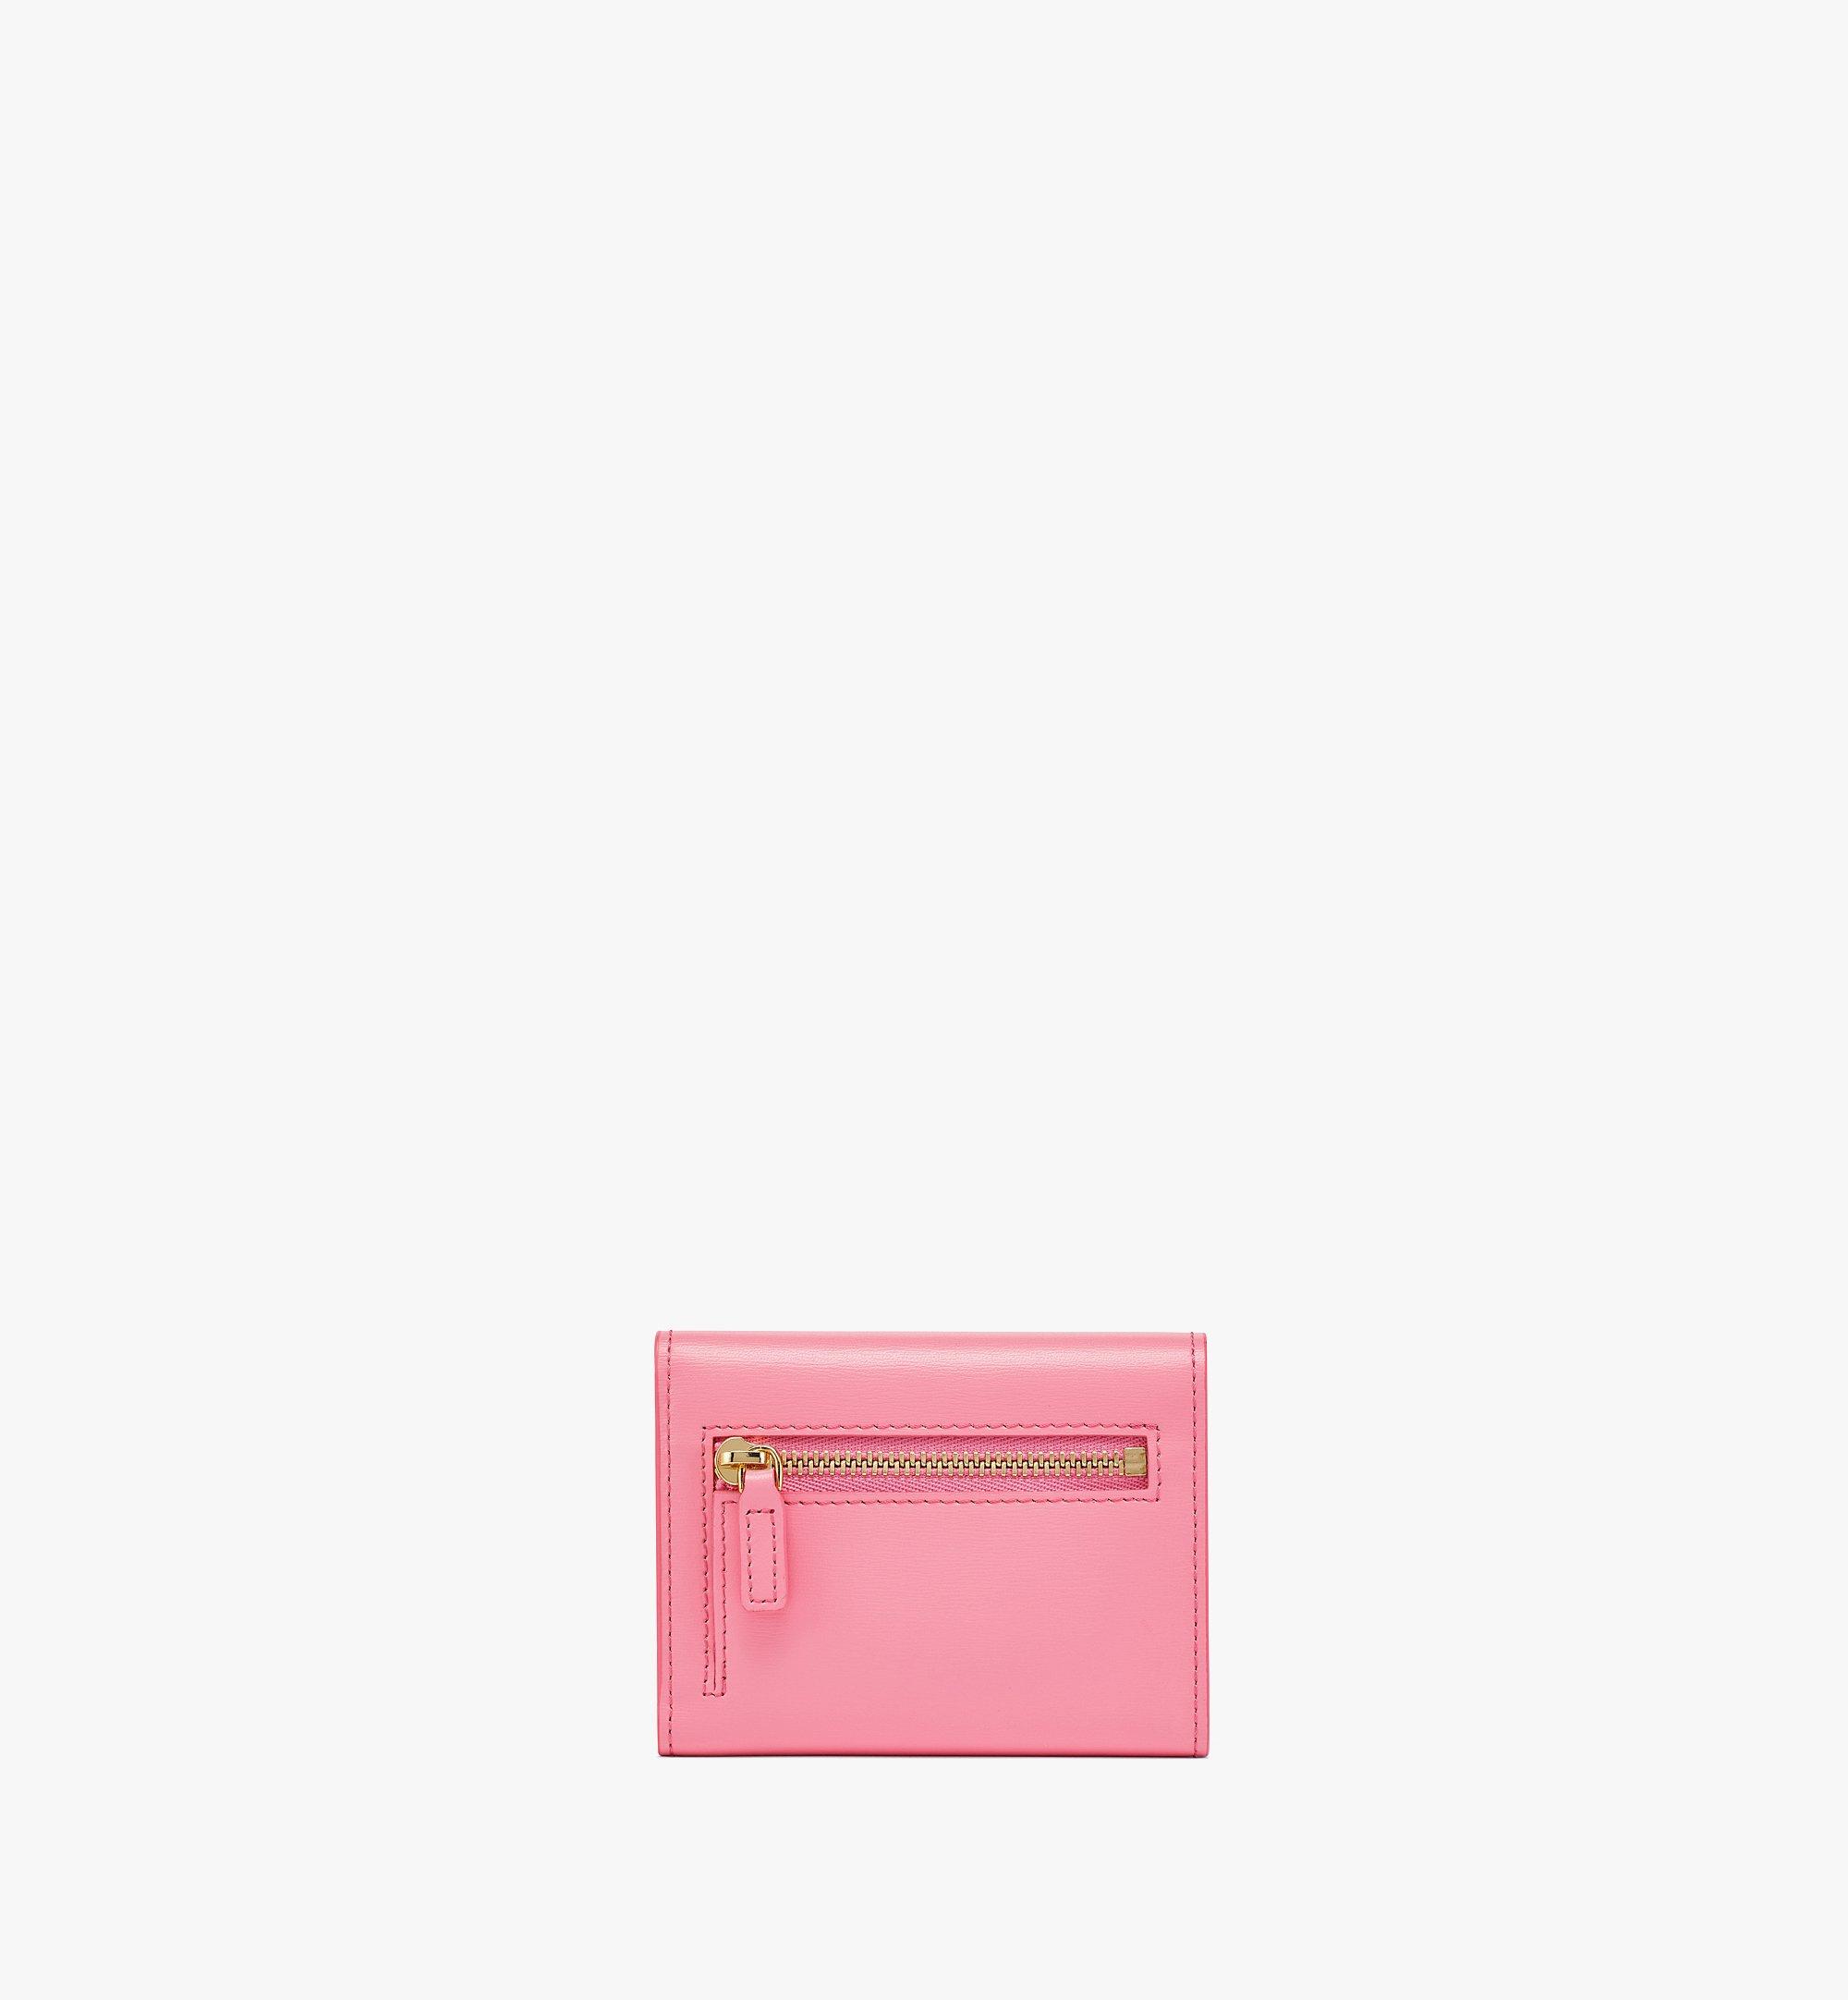 MCM Patricia Trifold Wallet in Spanish Leather Pink MYSBAPA01QV001 Alternate View 2